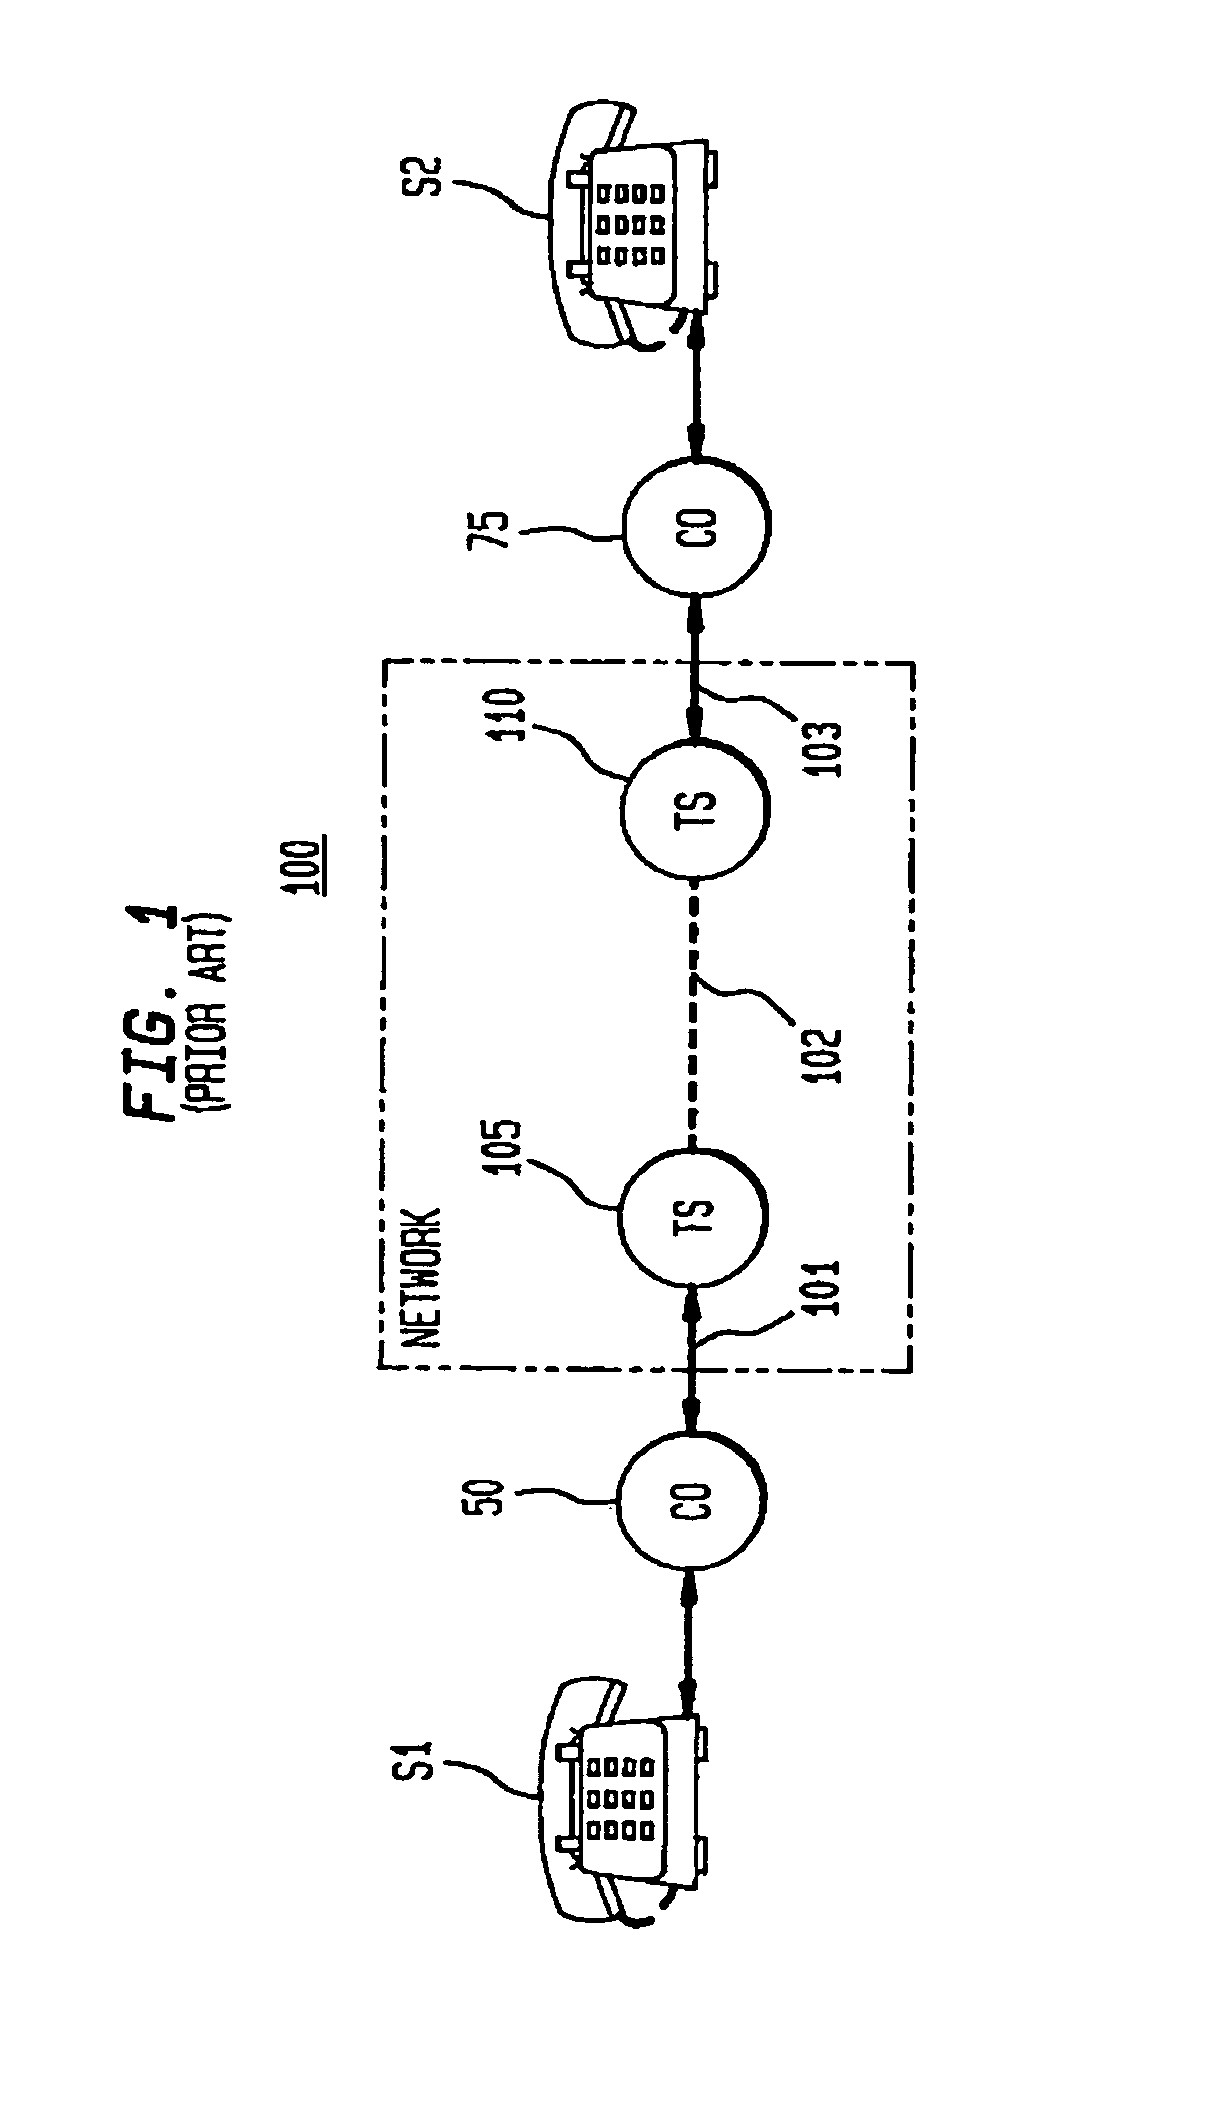 Methods and apparatus for providing voice communications through a packet network